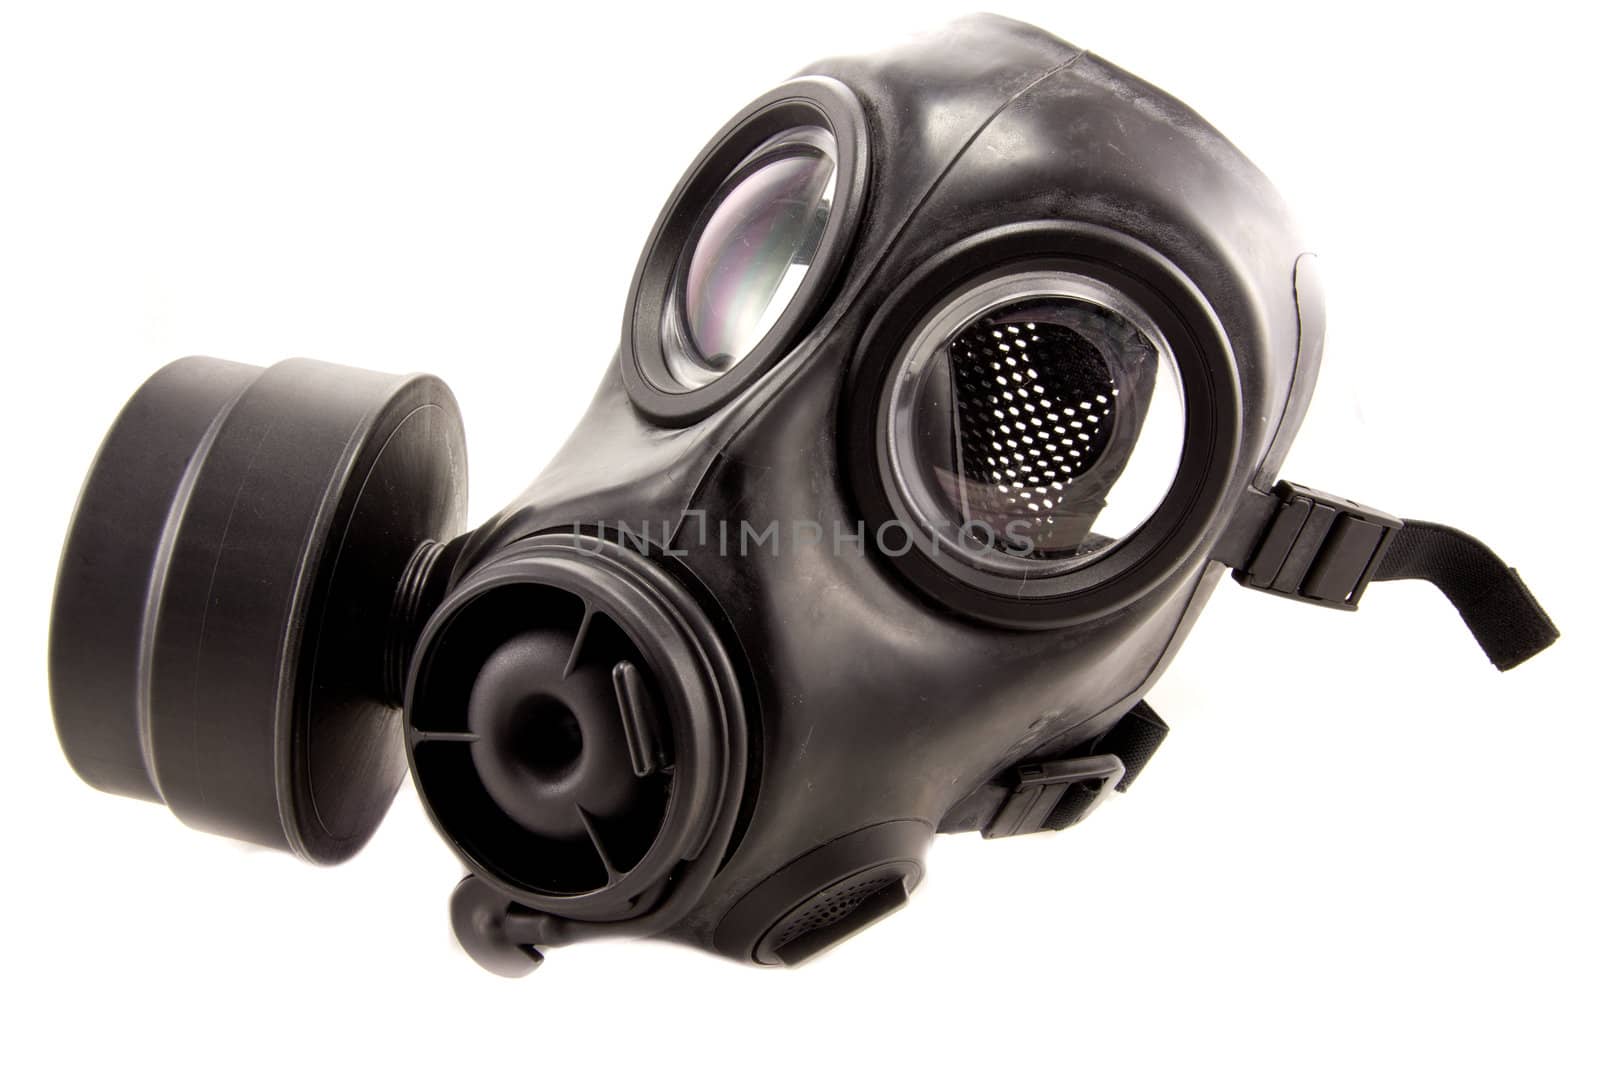 Gas mask by Stootsy